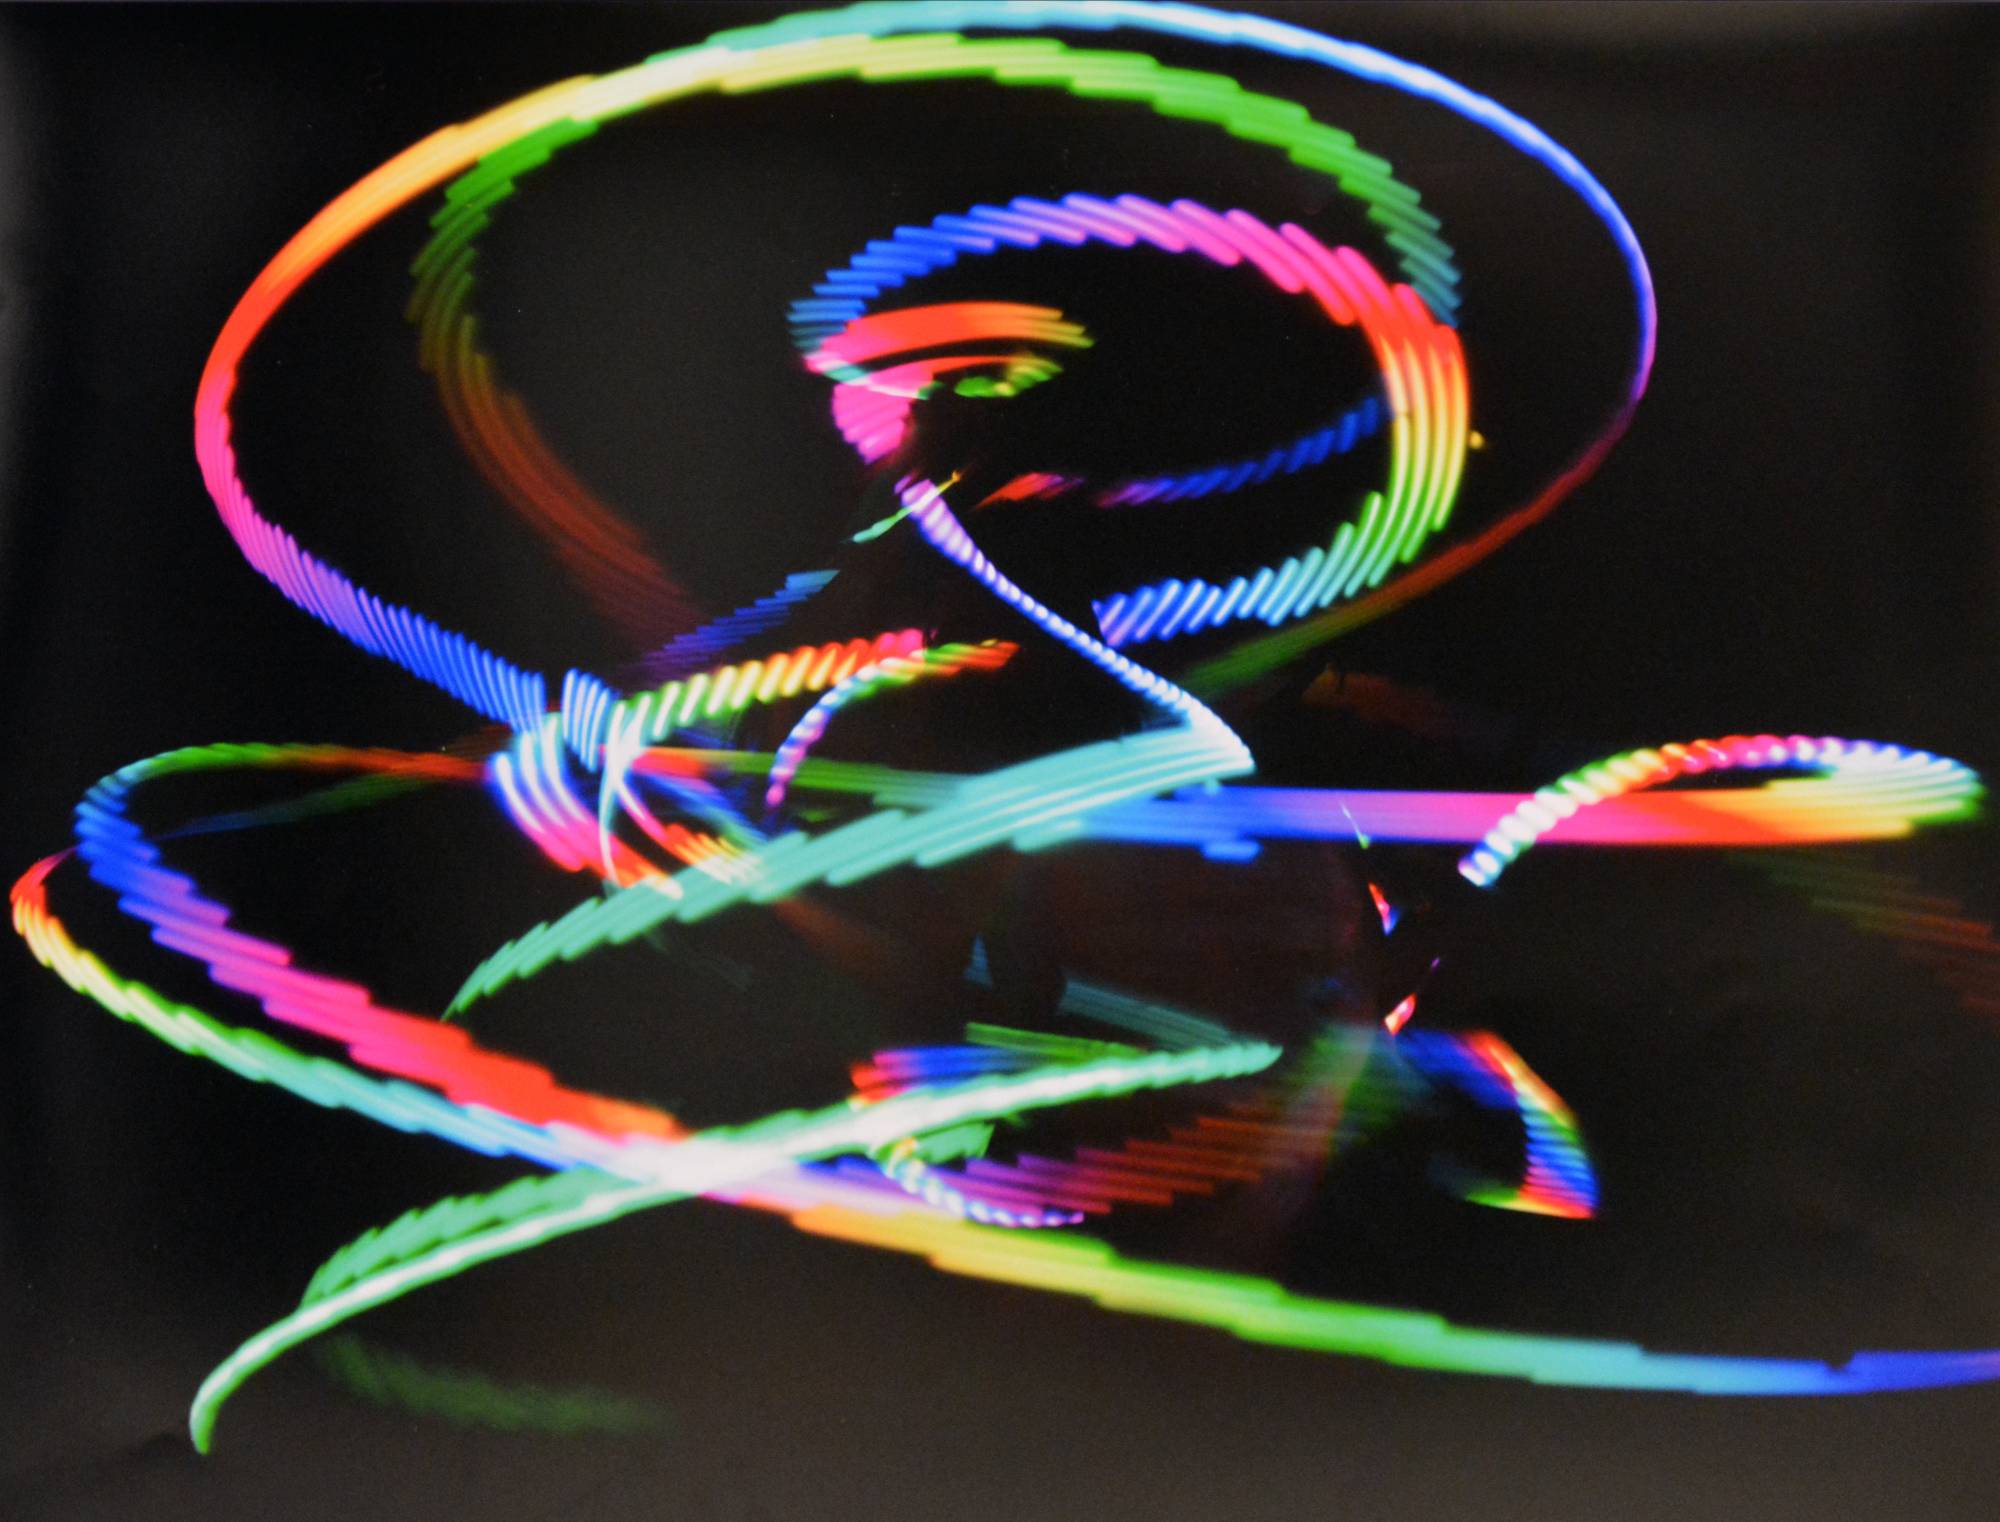 black background with rainbow light trails swirling in circular design